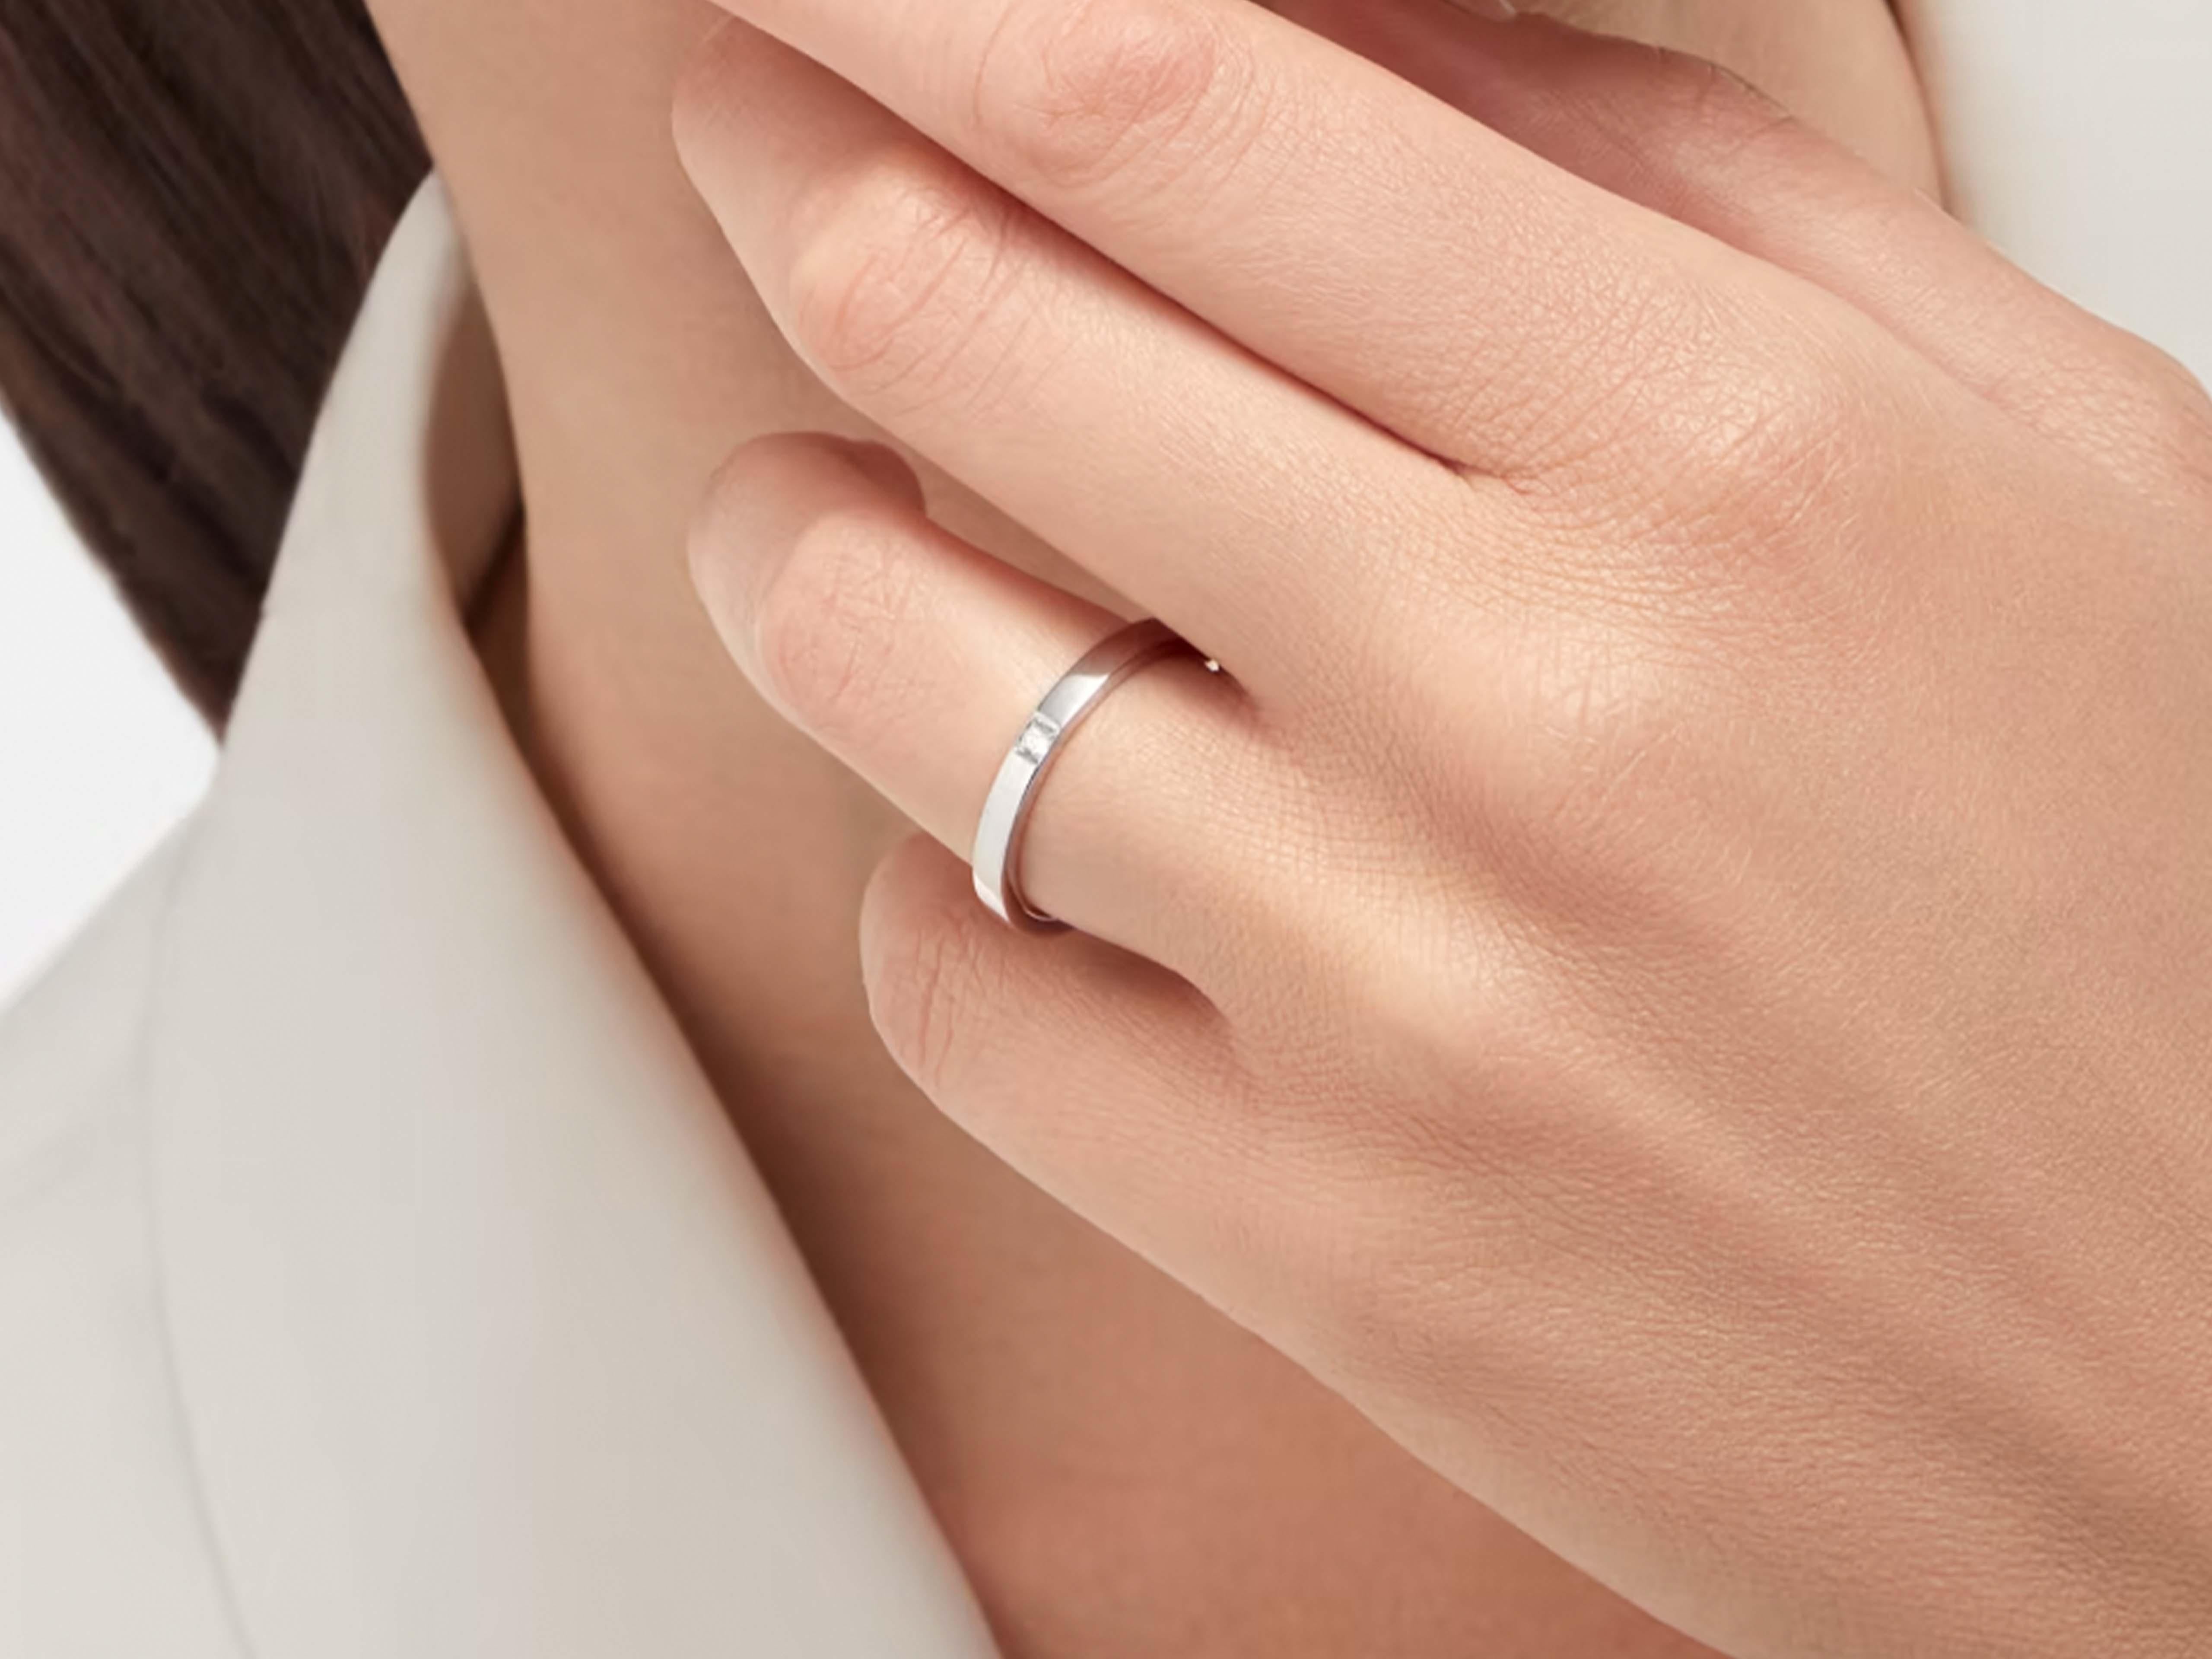 The ultimate symbol of two hearts united, the MarryMe wedding band seals a bond of love for eternity with pure Italian style. As bold as the proposal, as decisive as saying yes, the wedding band makes a strong statement with its architectural